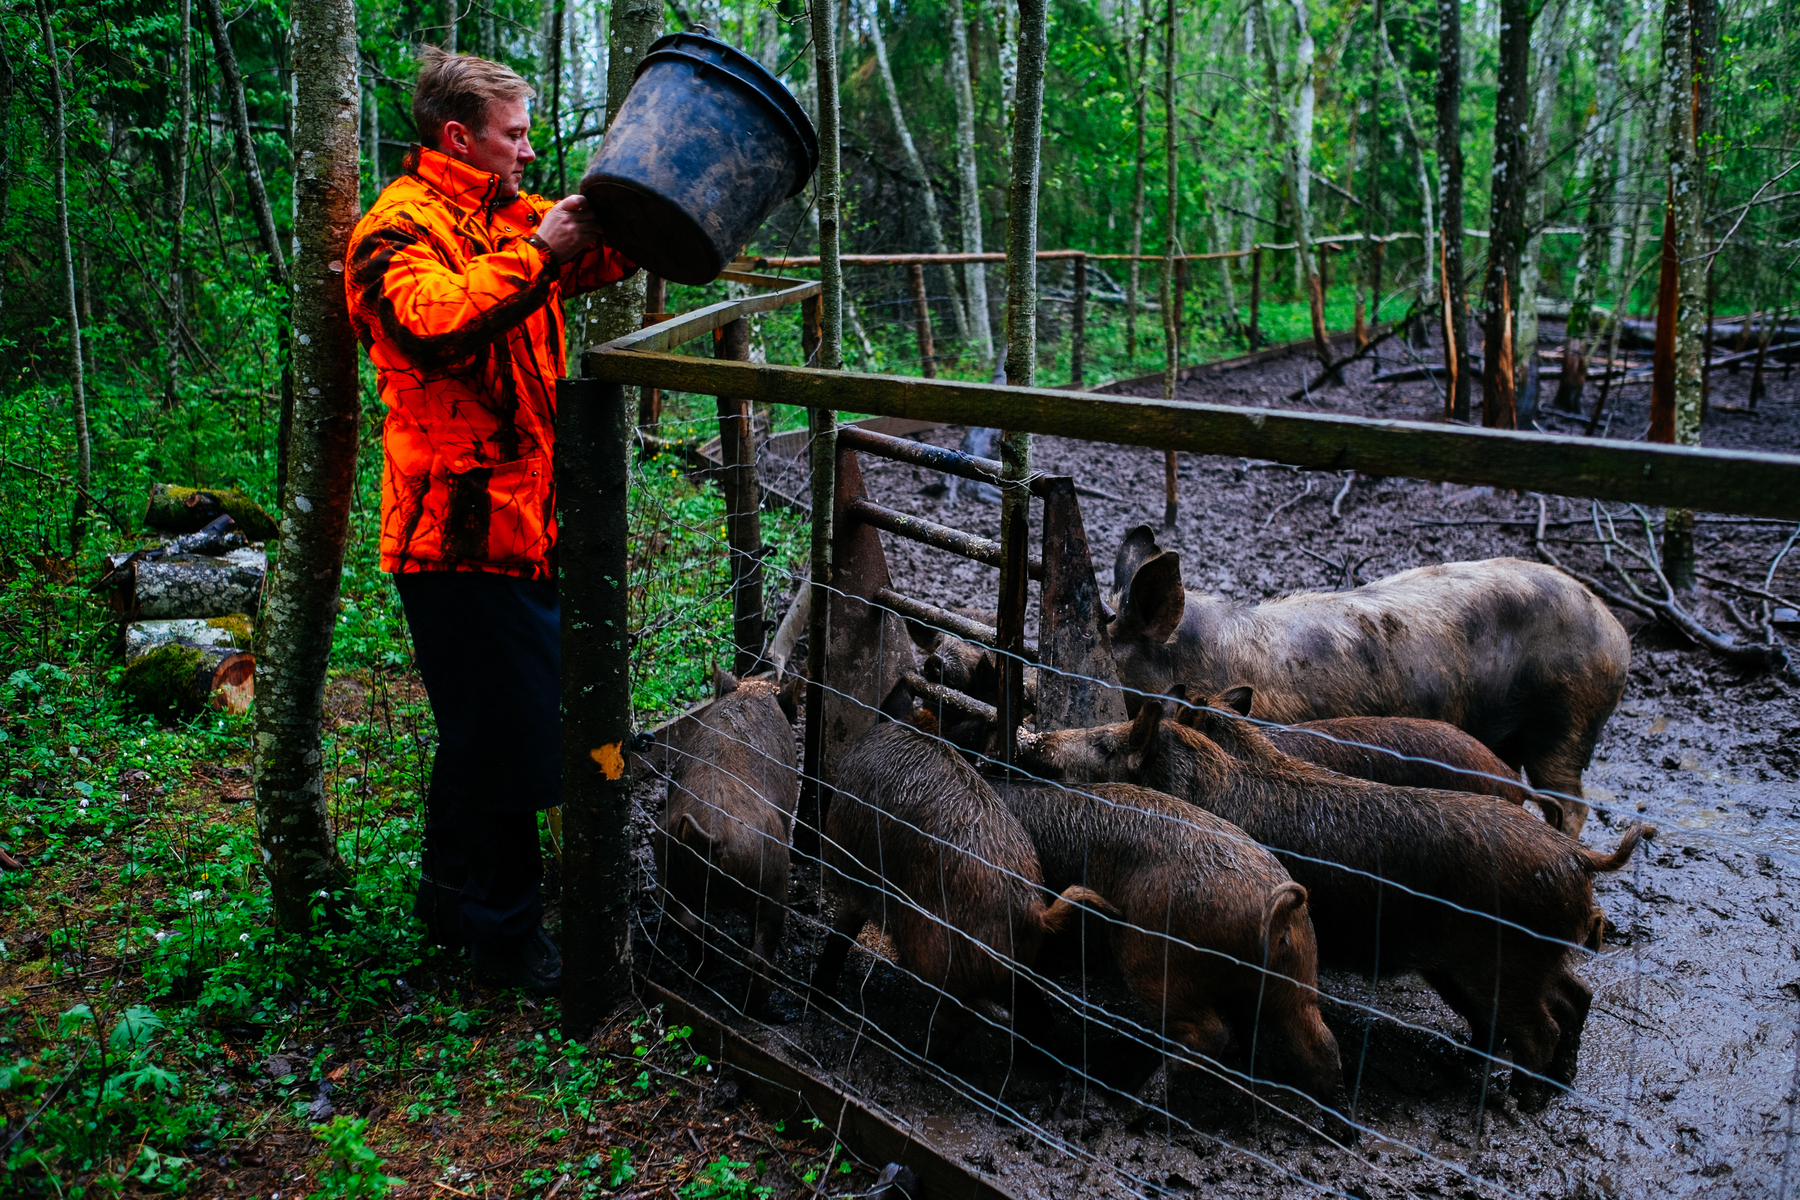 A man in a bright orange jacket feed a bunch of pigs in the middle of a forest.